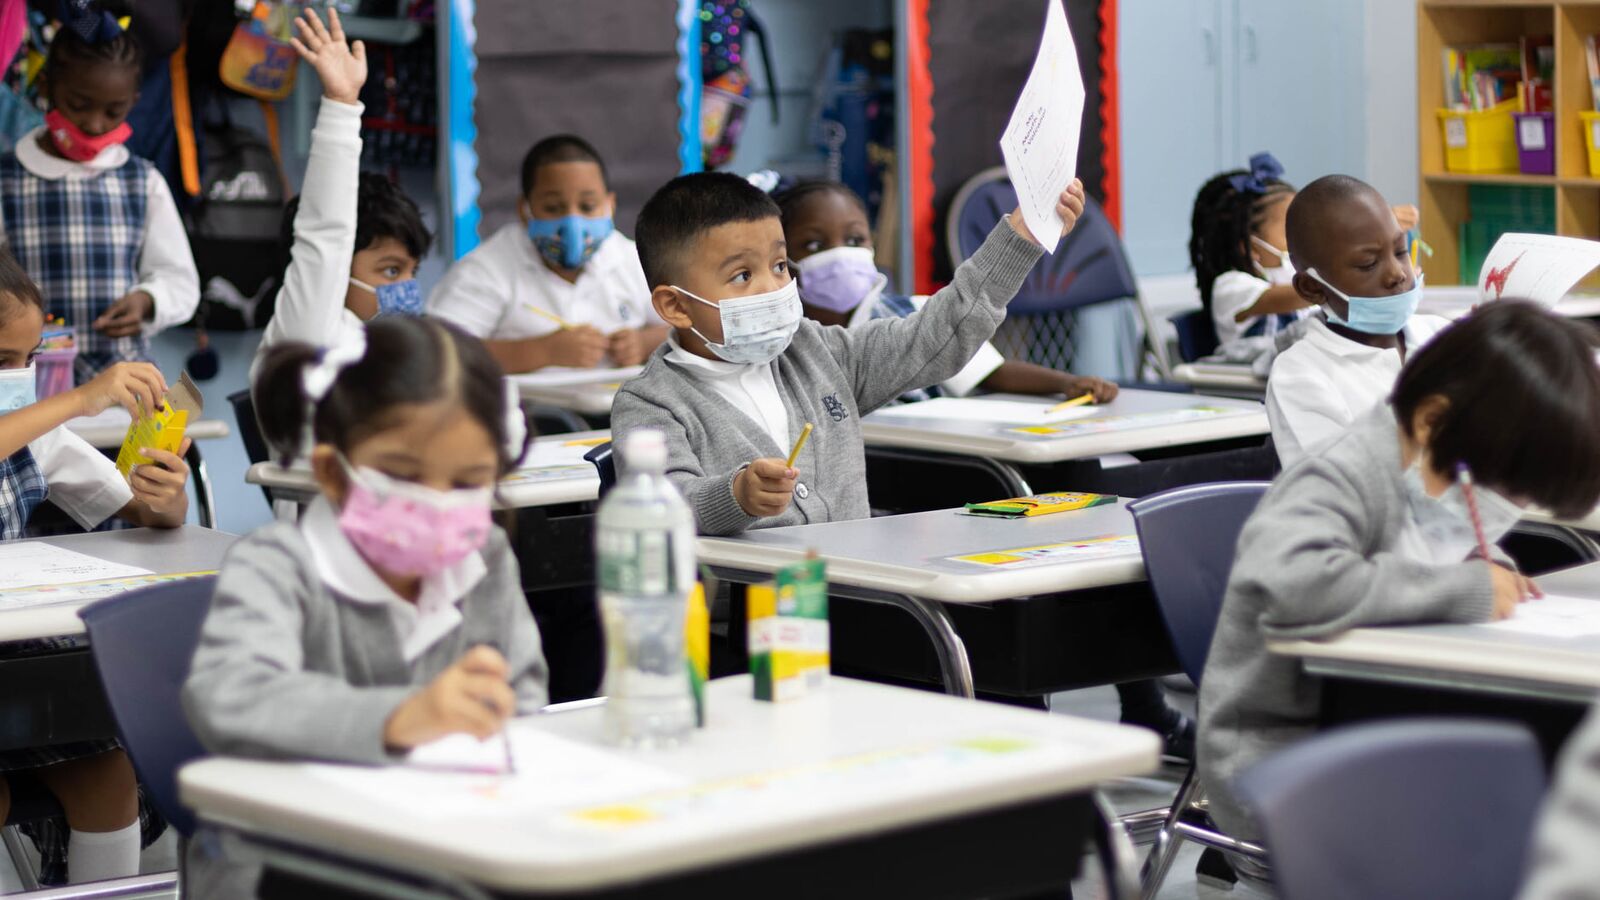 medium shot of classroom full of elementary students working at their desks wearing masks. One student in the center is raising a sheet of paper in the air while students around him continue working